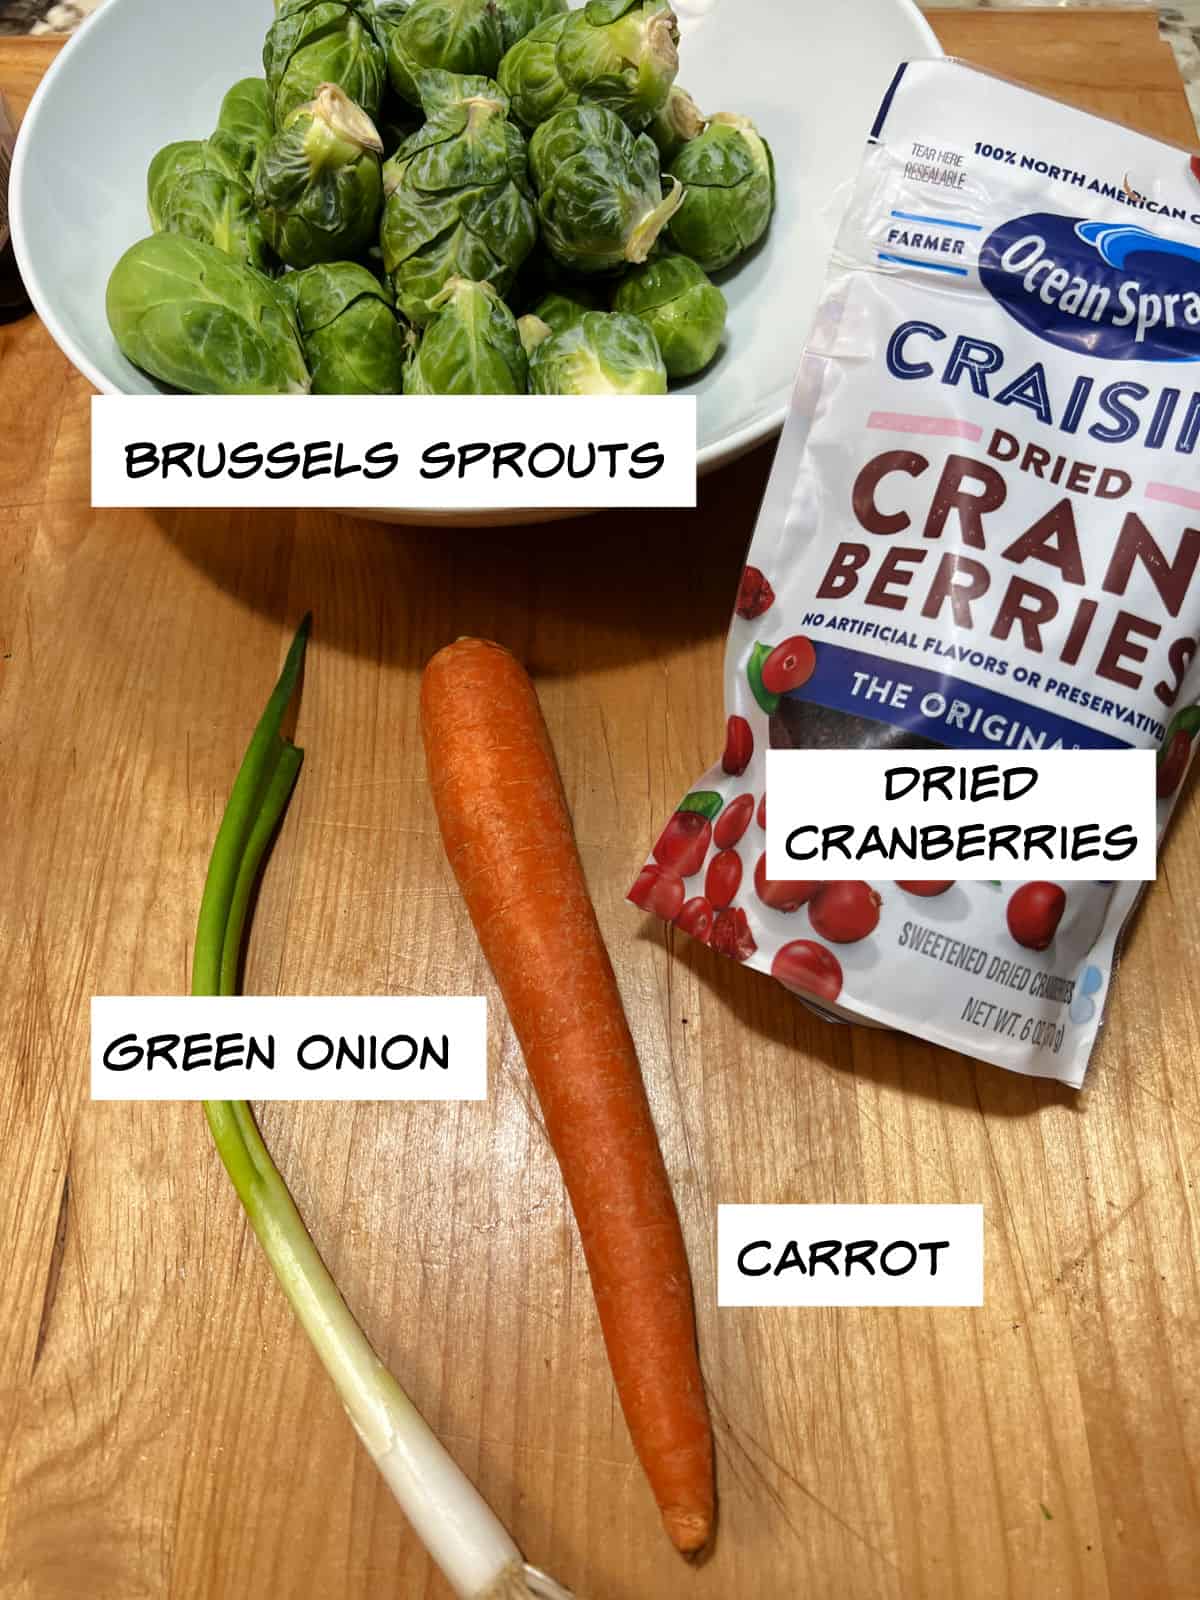 ingredients: brussels sprouts, craisins, carrot, and green onion.